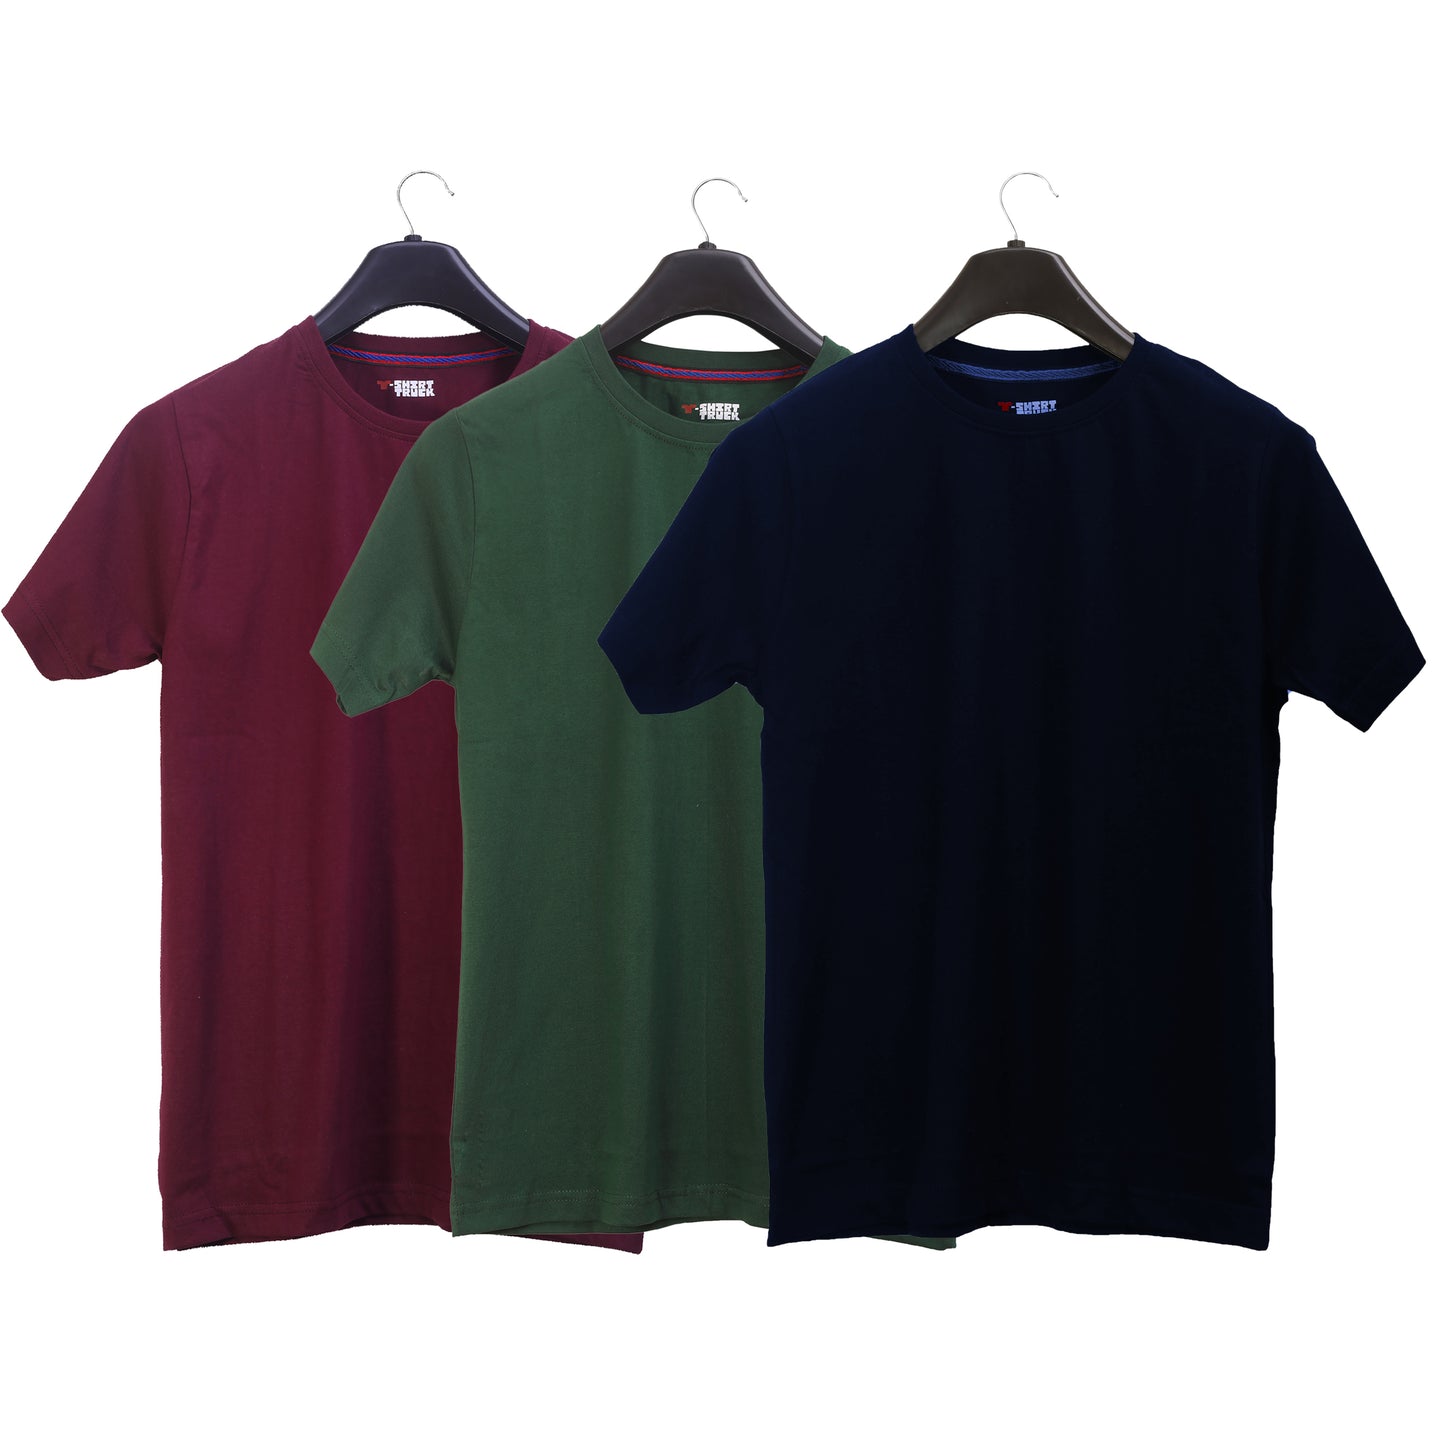 Unisex Round Neck Plain Solid Combo Pack of 3 T-shirts Blue, Maroon, & Green